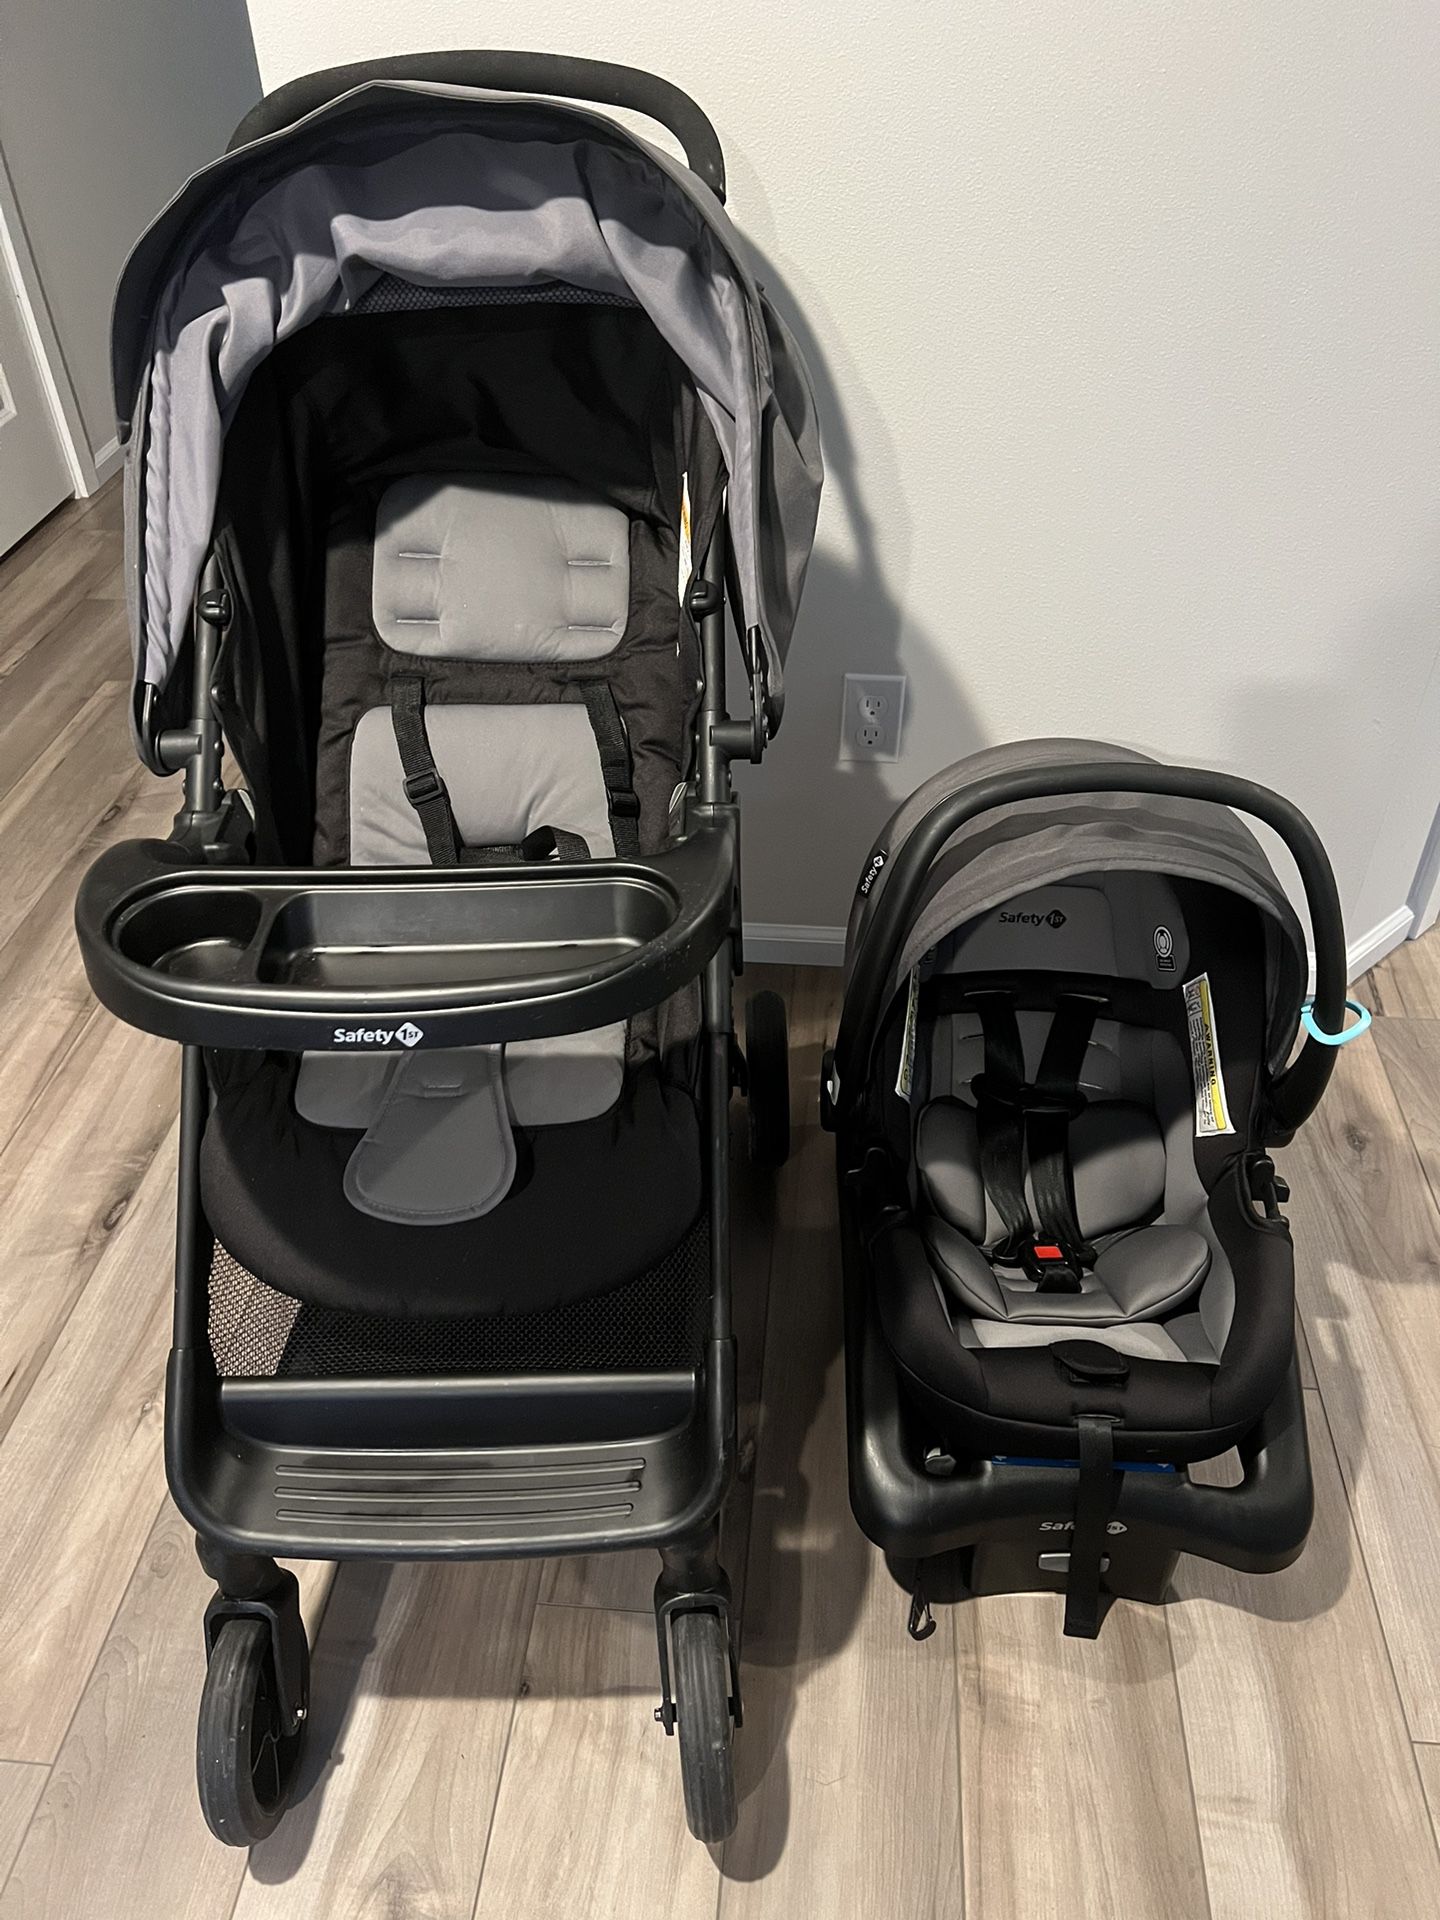 Safety 1st stroller and car seat travel system